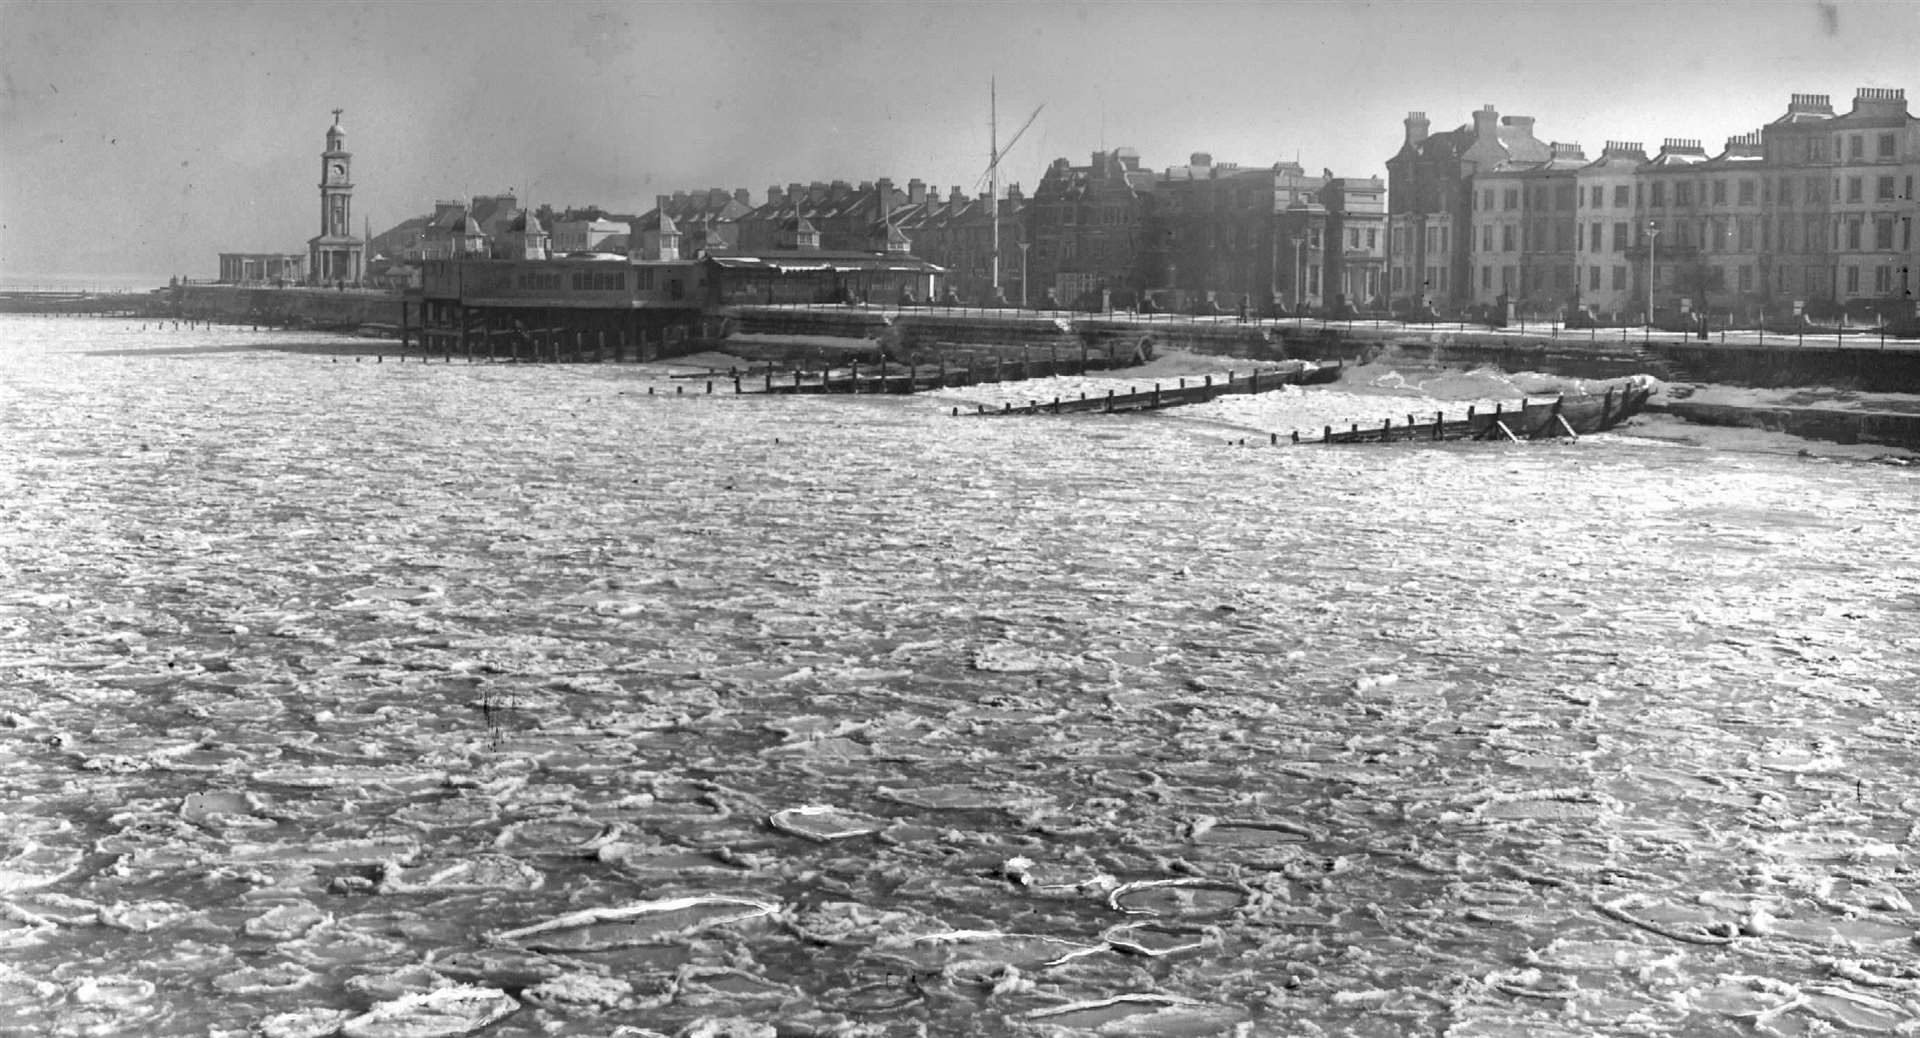 Winter of 62/63: The sea at Herne Bay freezes during prolonged cold spell